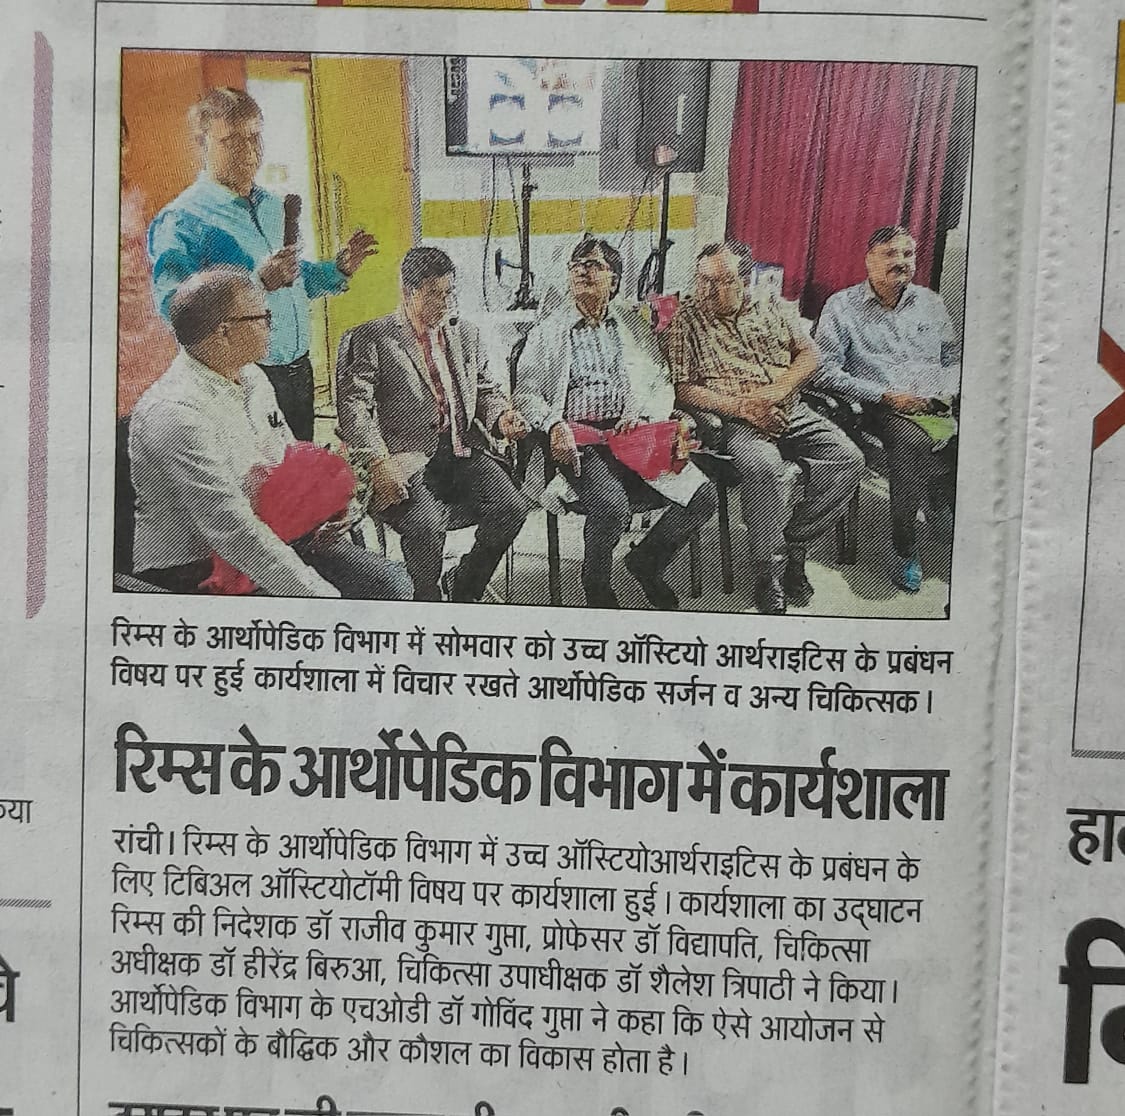 Workshop at the Orthopadic Department in RIMS